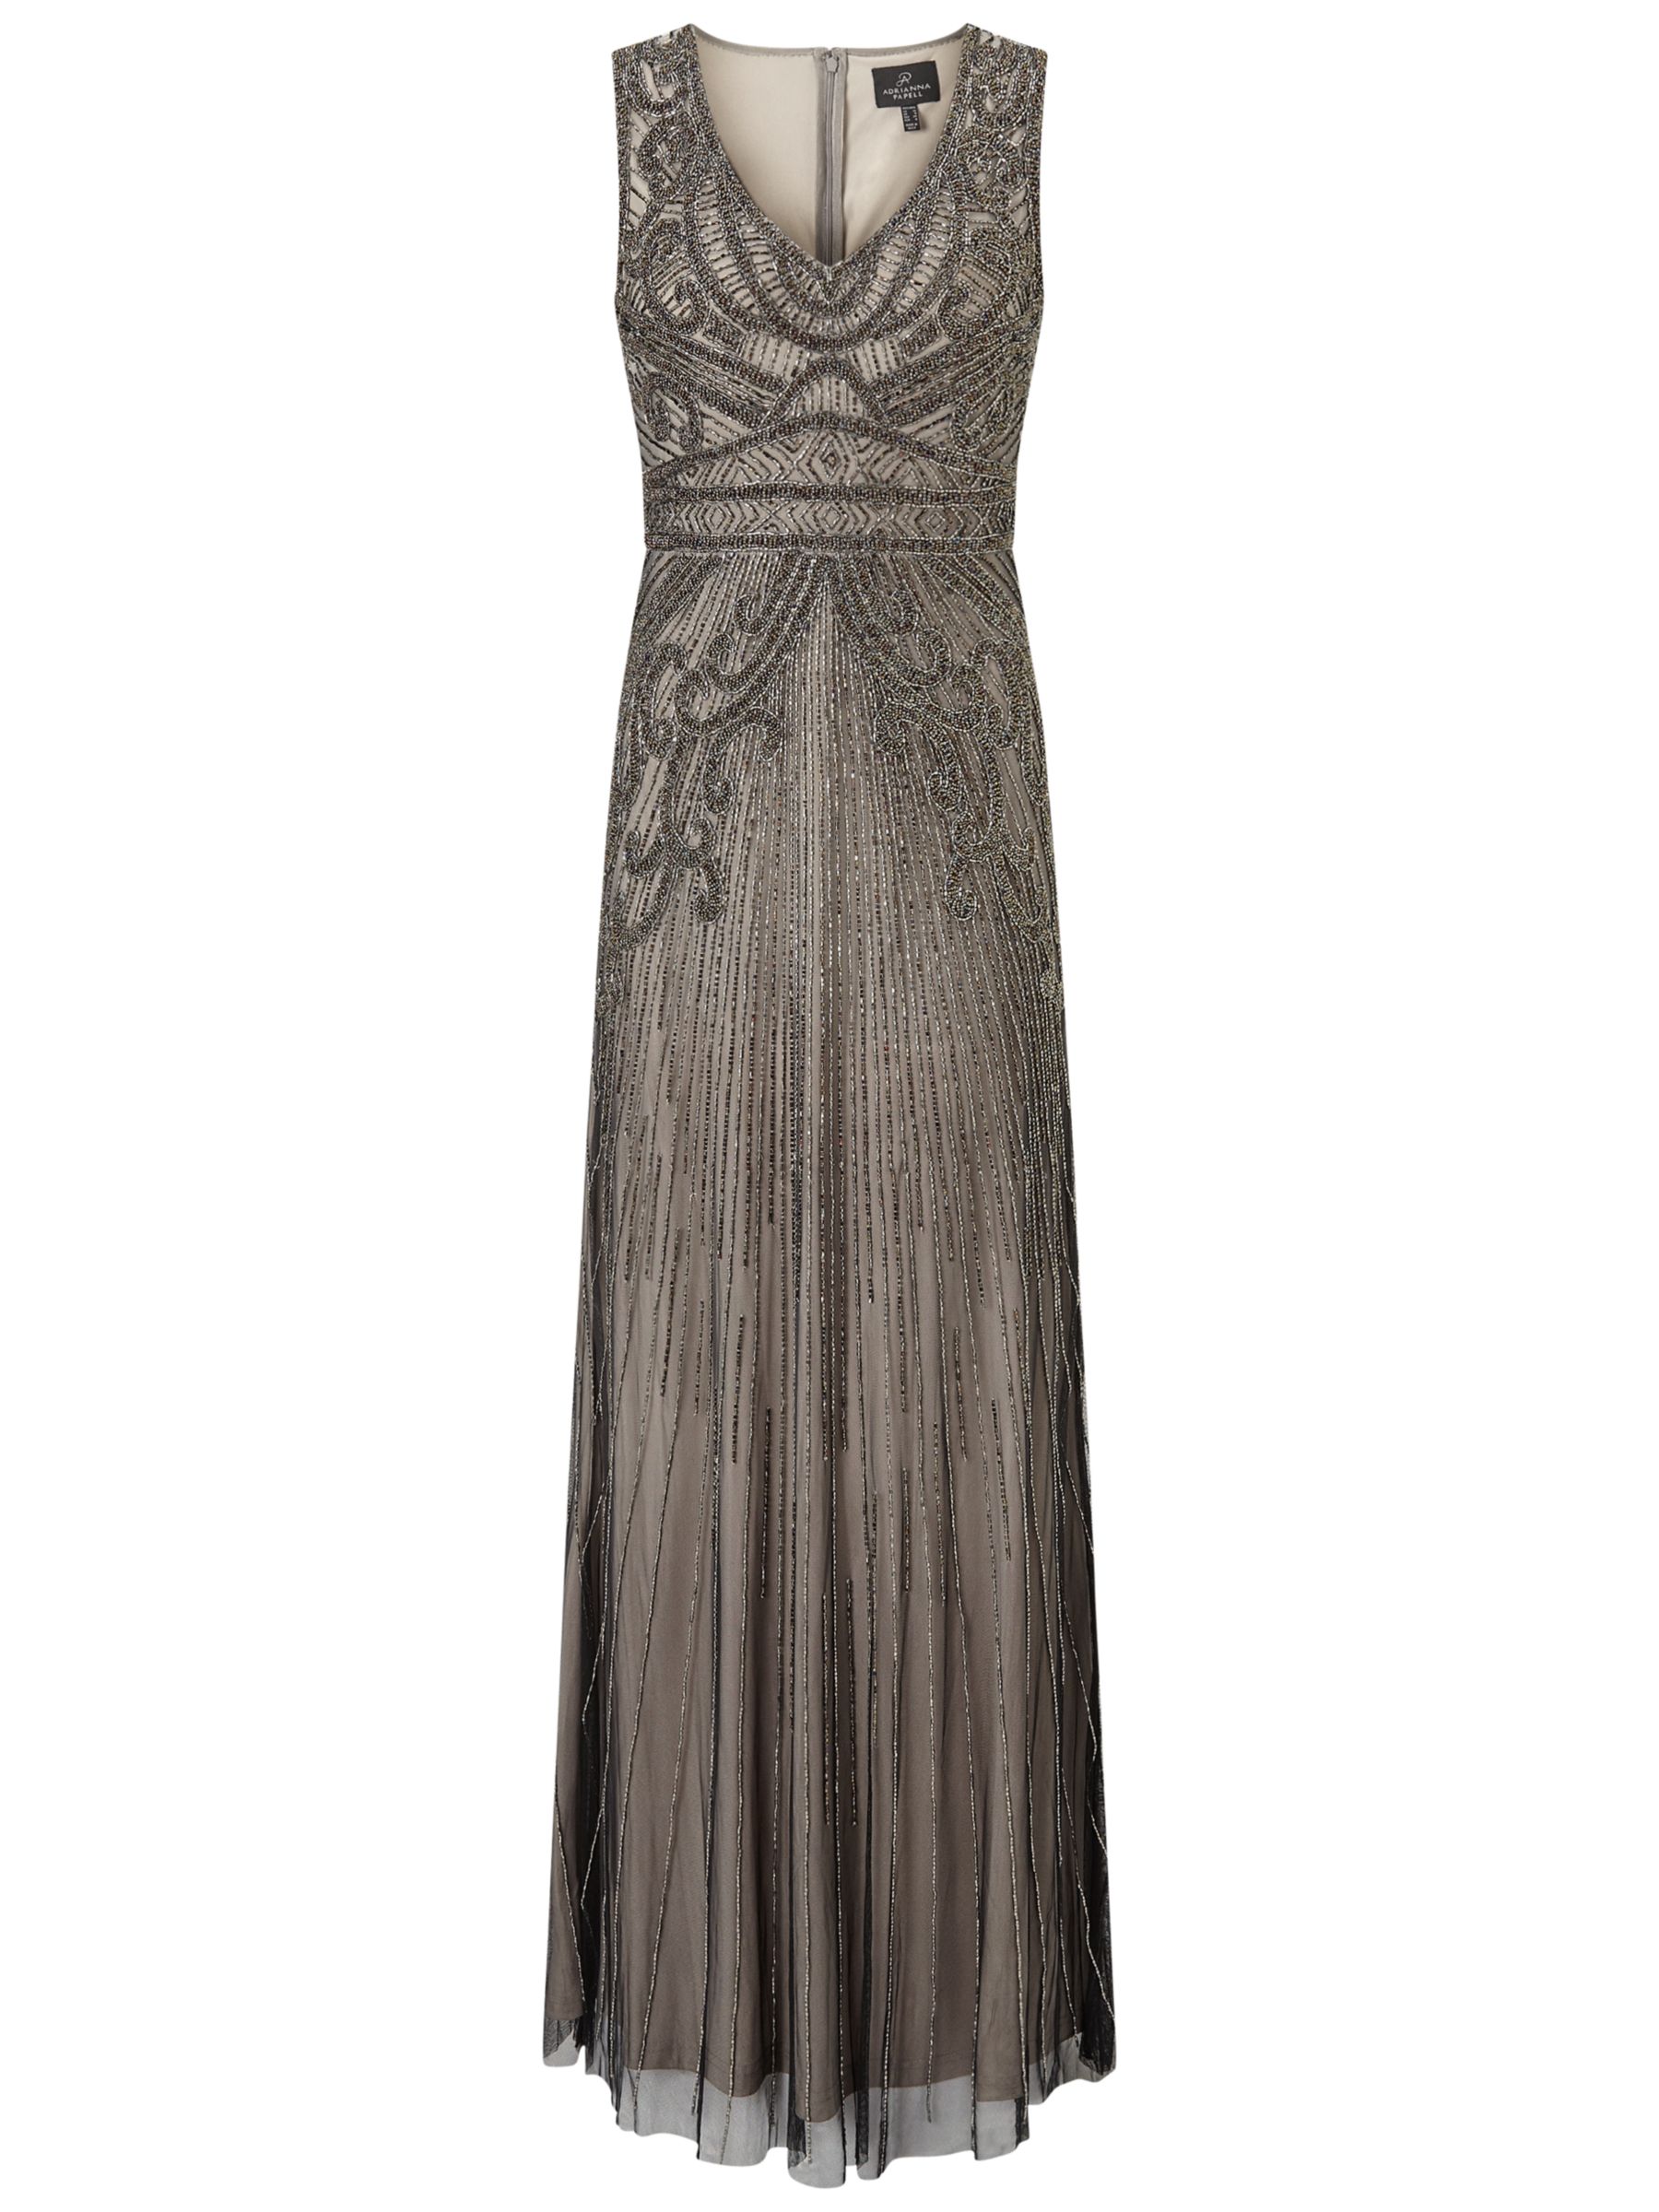 Adrianna Papell Fully Beaded Sleeveless Gown, Platinum